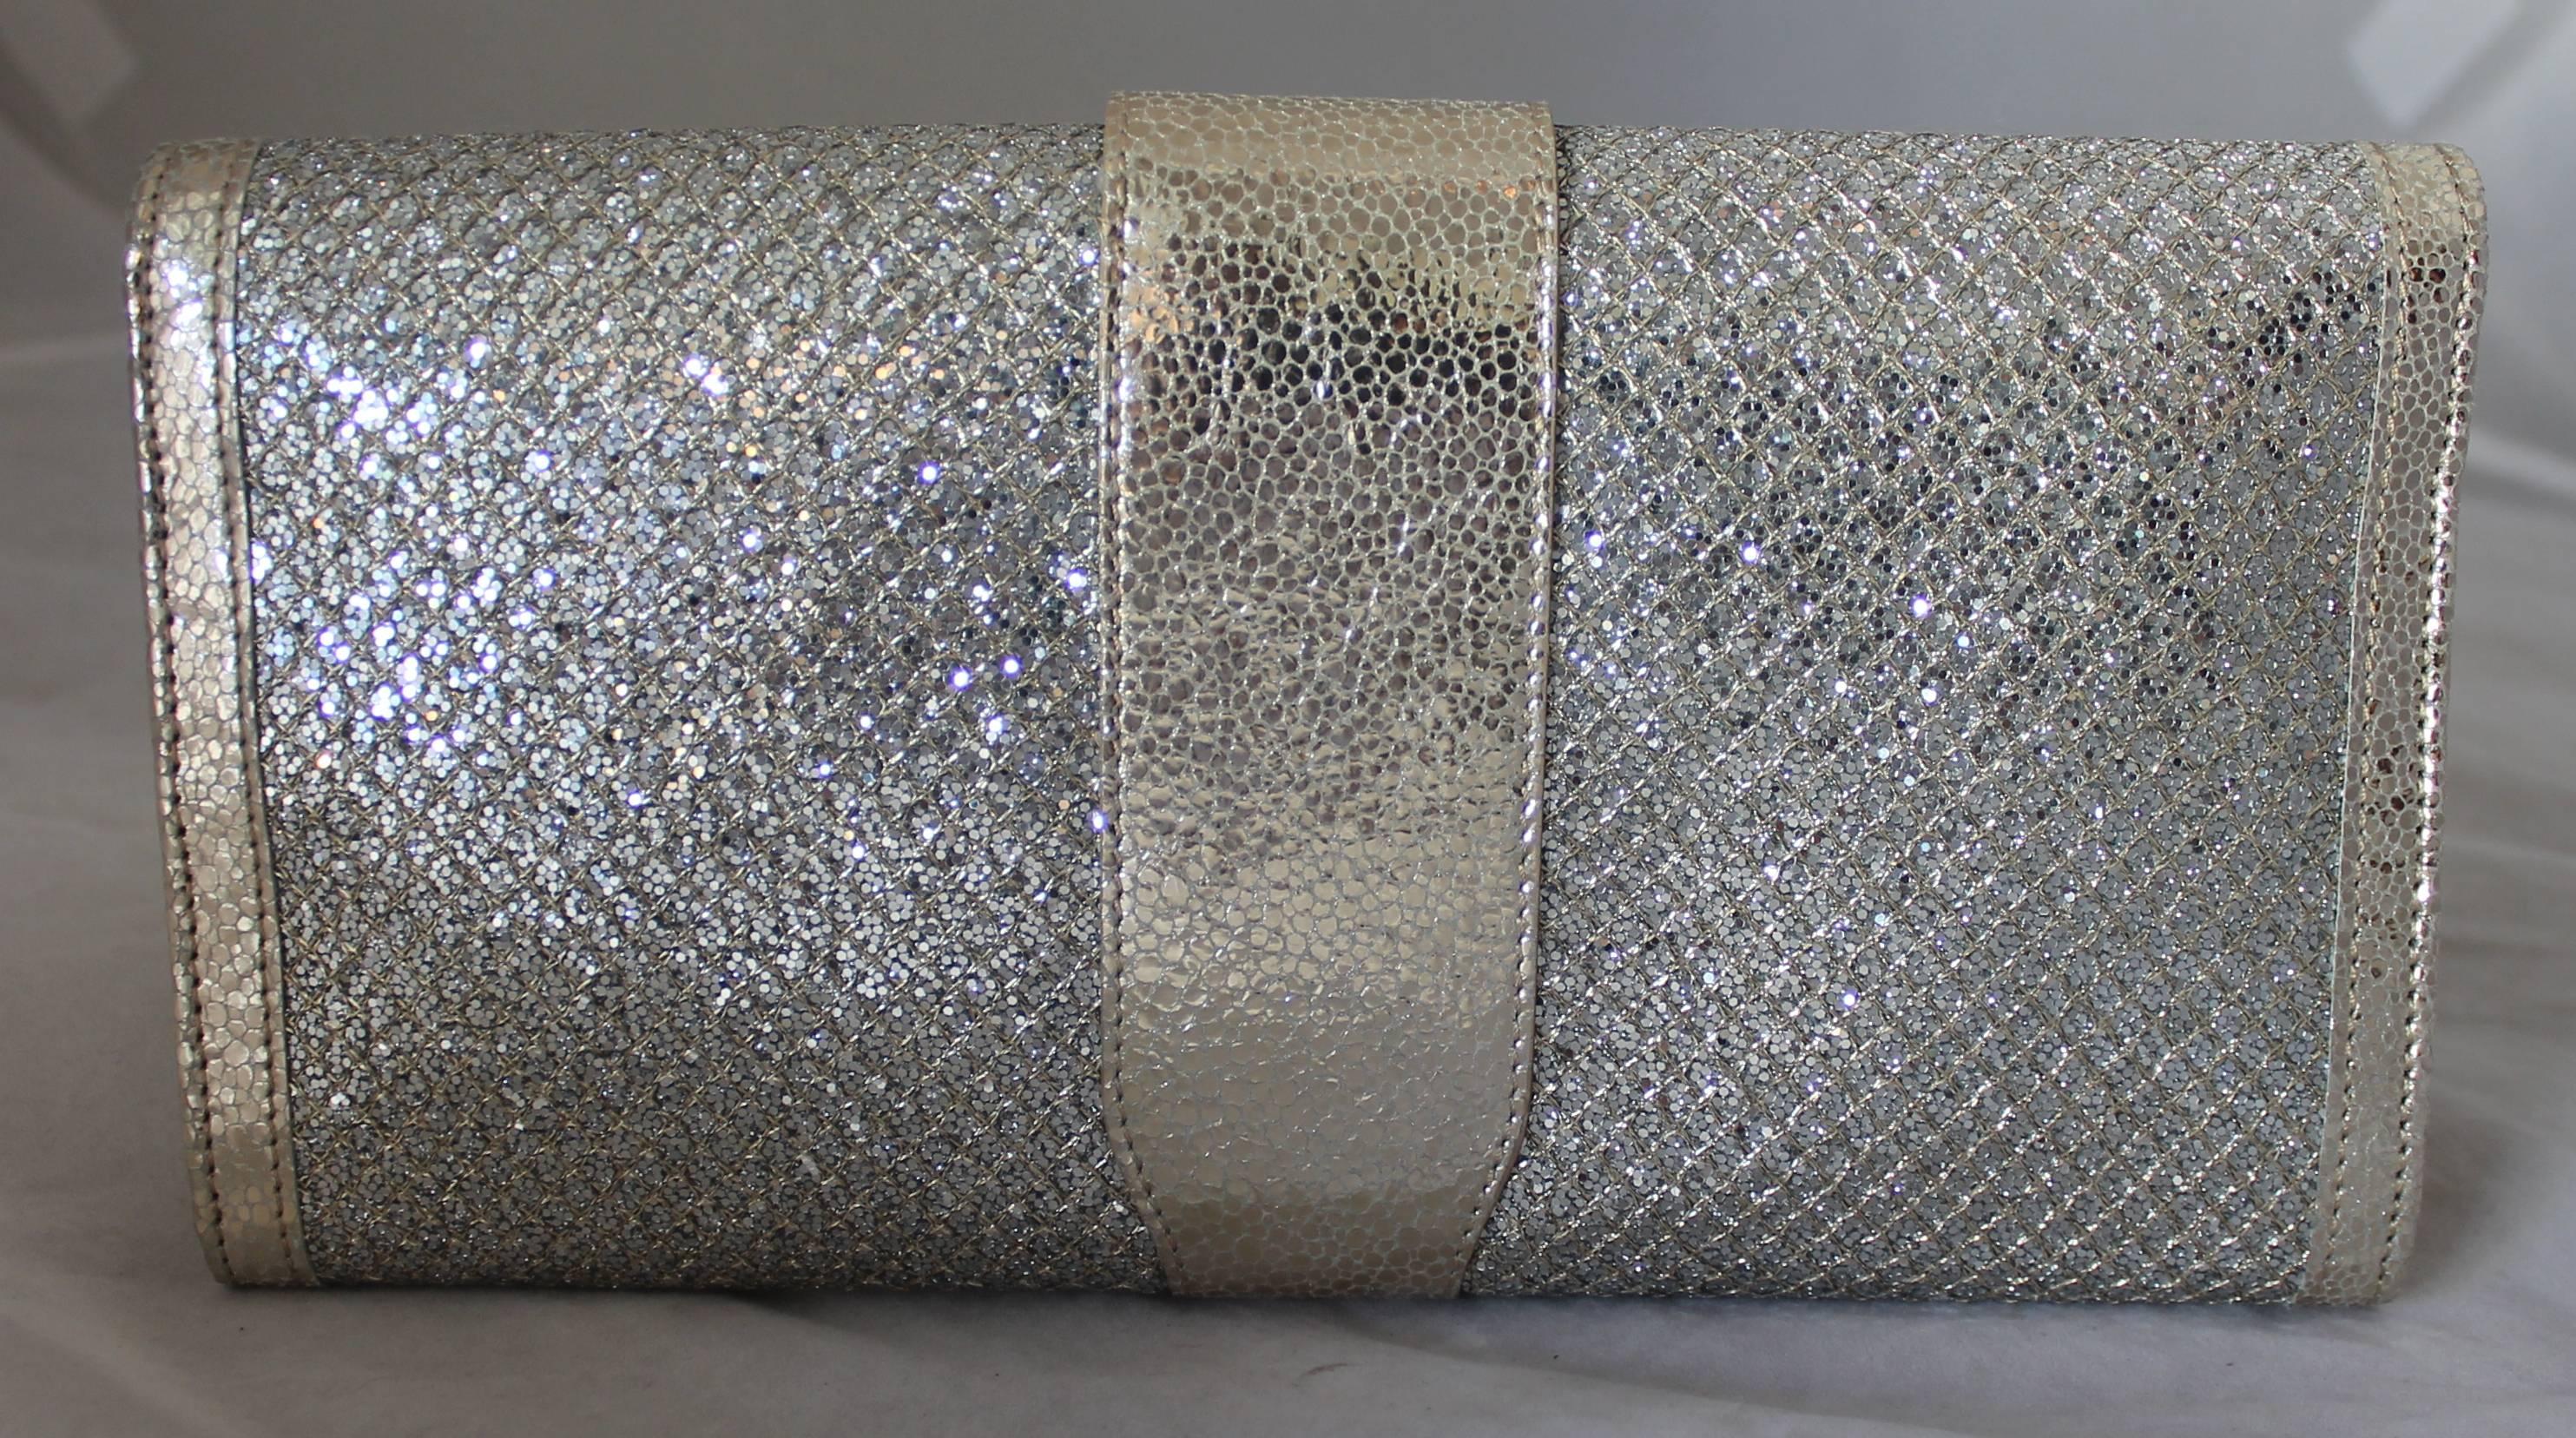 Jimmy Choo Silver & Gold Lame & Leather Sparkle Clutch - GHW.  This stunning clutch has two main compartments, separate zip compartments inside, and 12 credit card slits.  It has a beautiful sparkle lame w/ leather trim and interior.  It is in